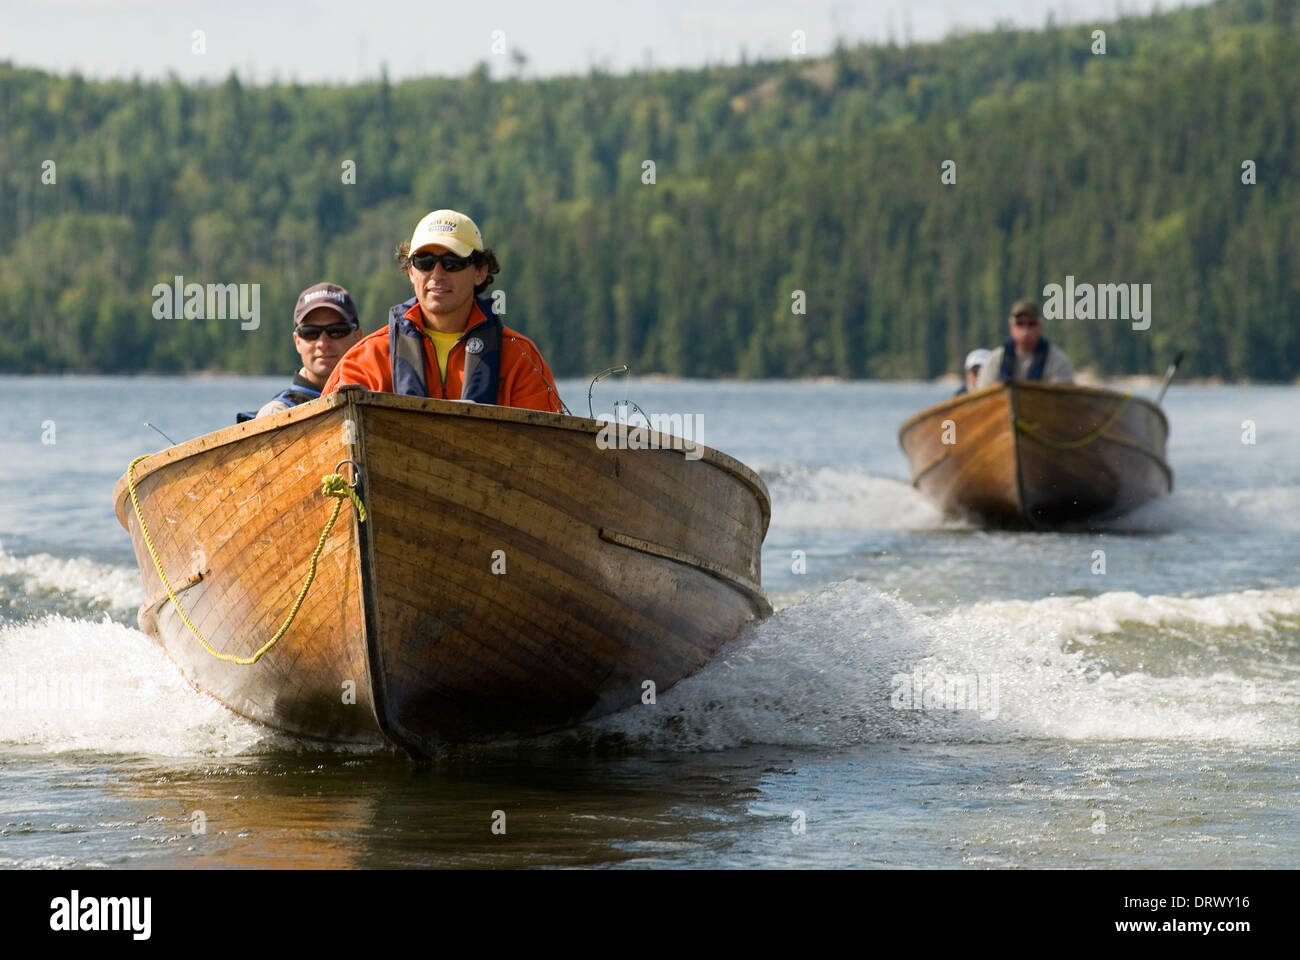 Fishermen traveling in wooden motor boats on a Northern Ontario lake. Stock Photo